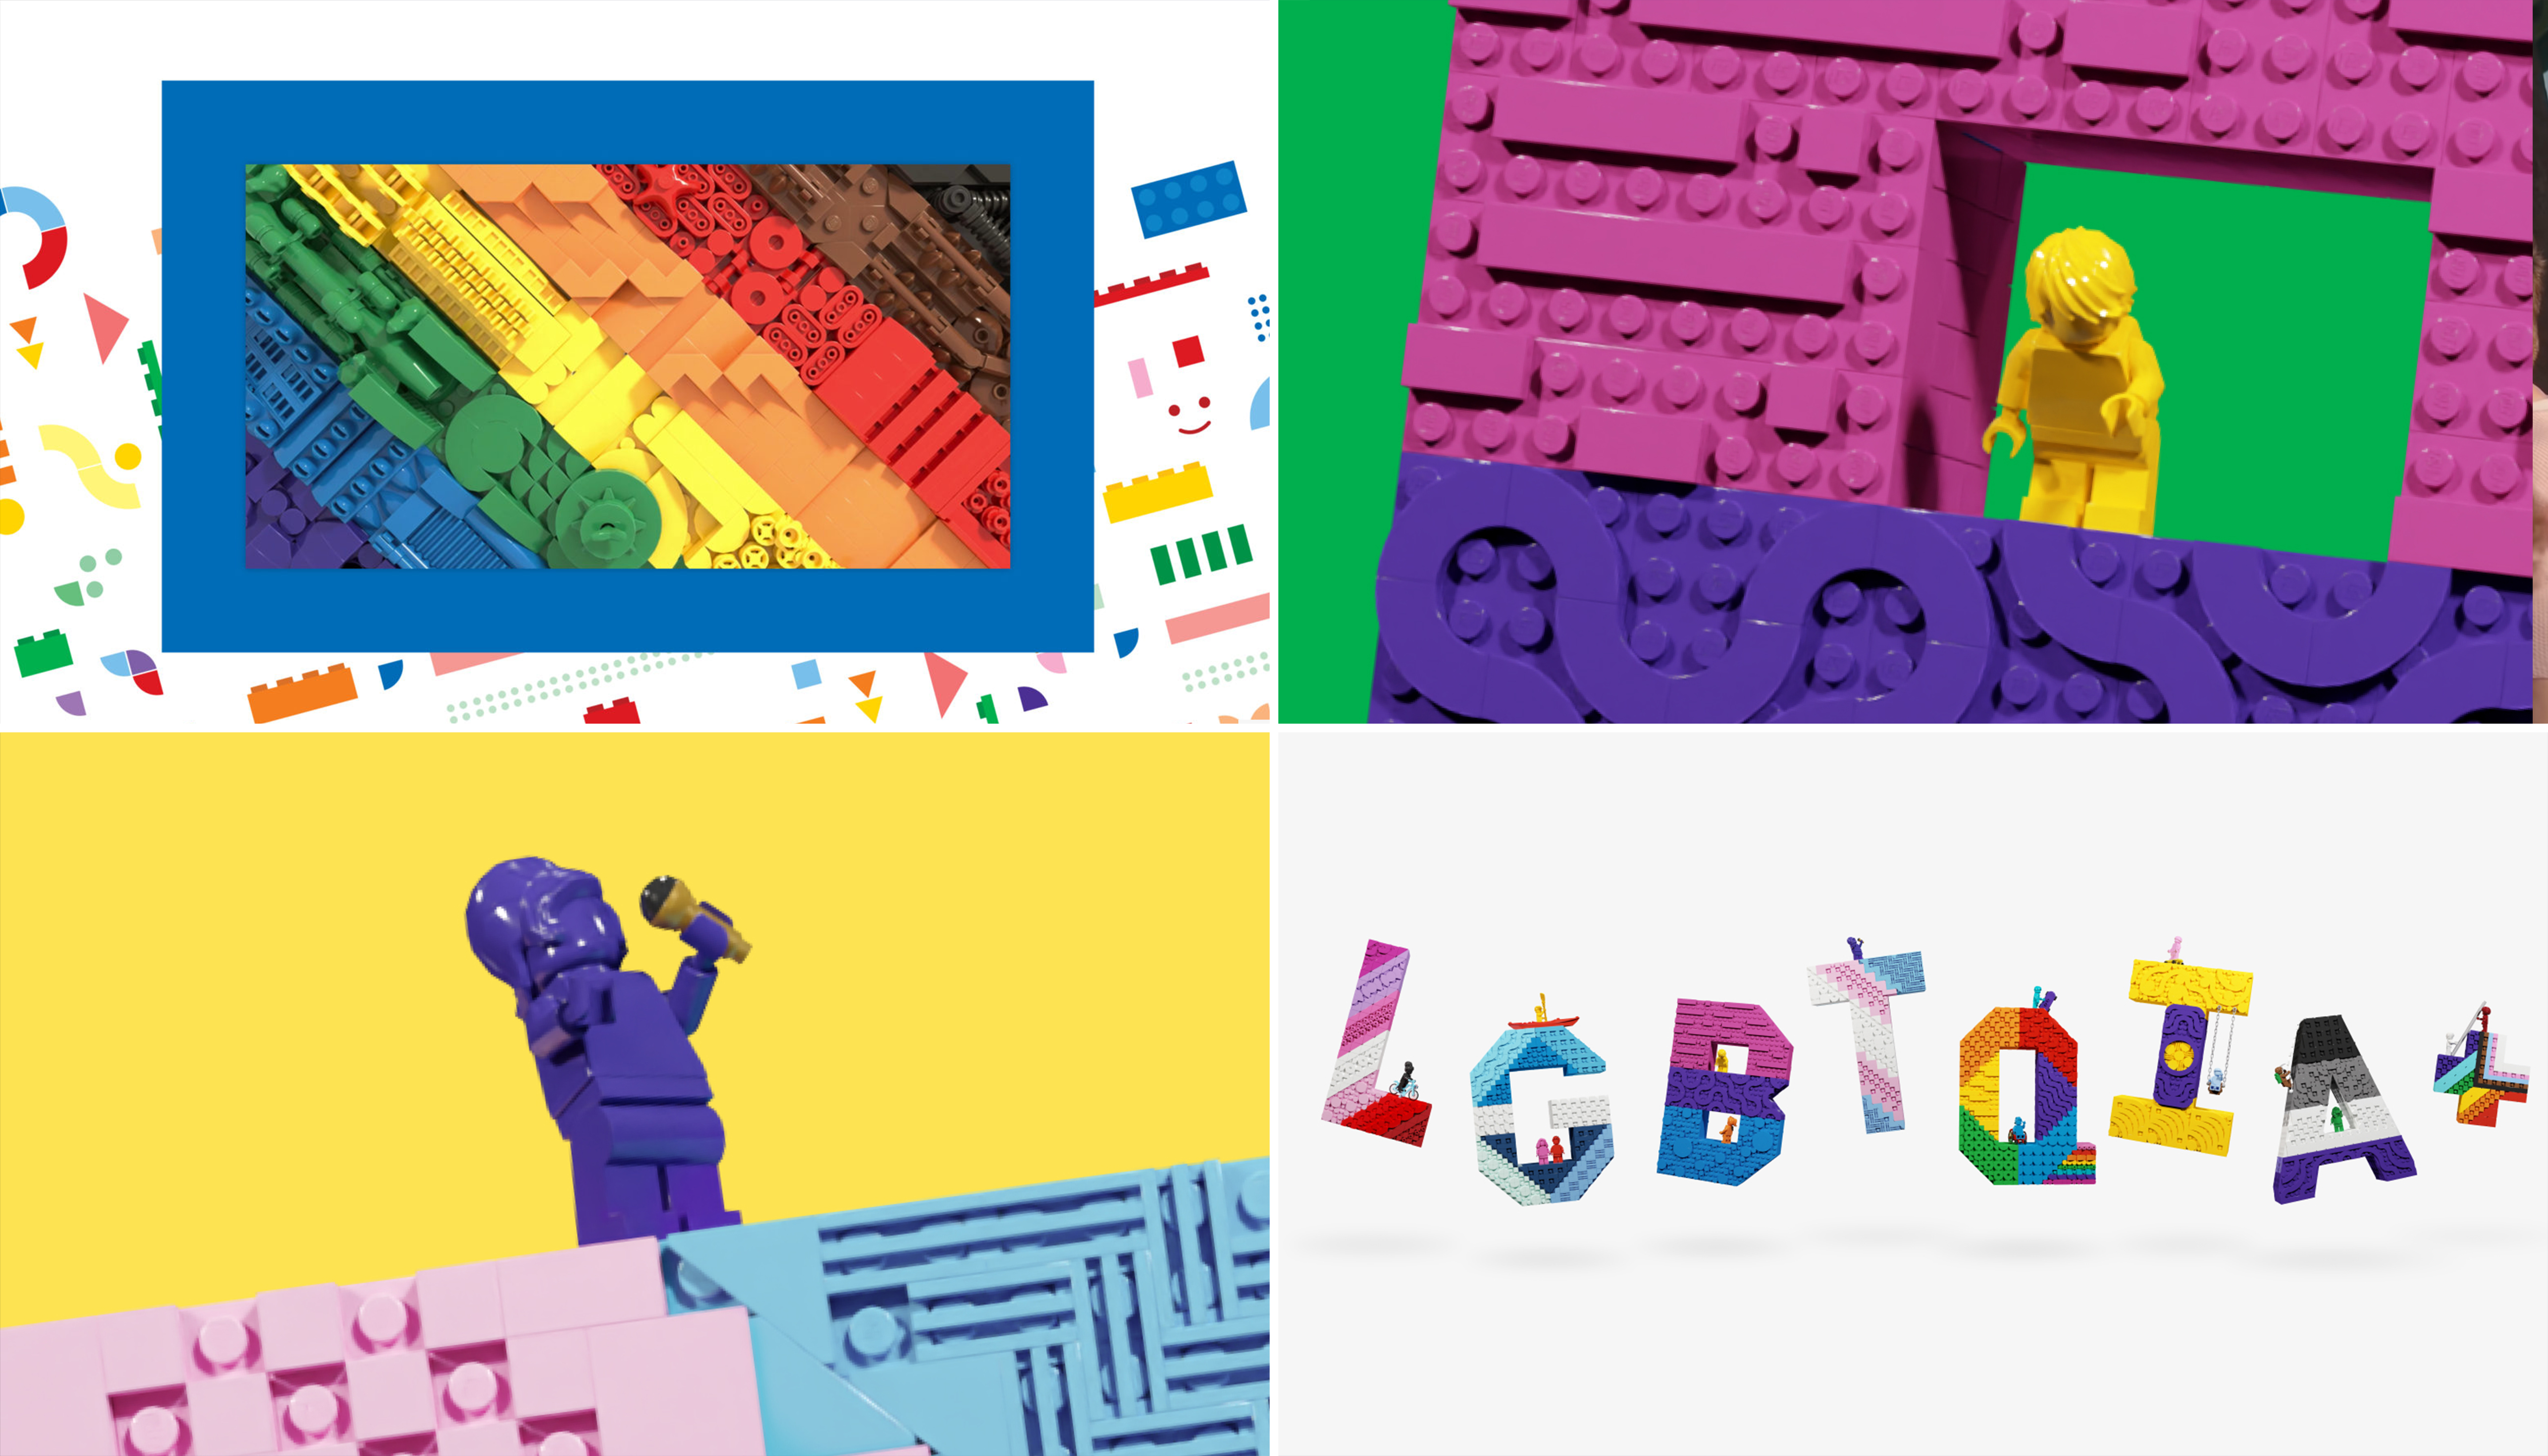 Campaign Supporting the LGBTQ+ Community from Lego